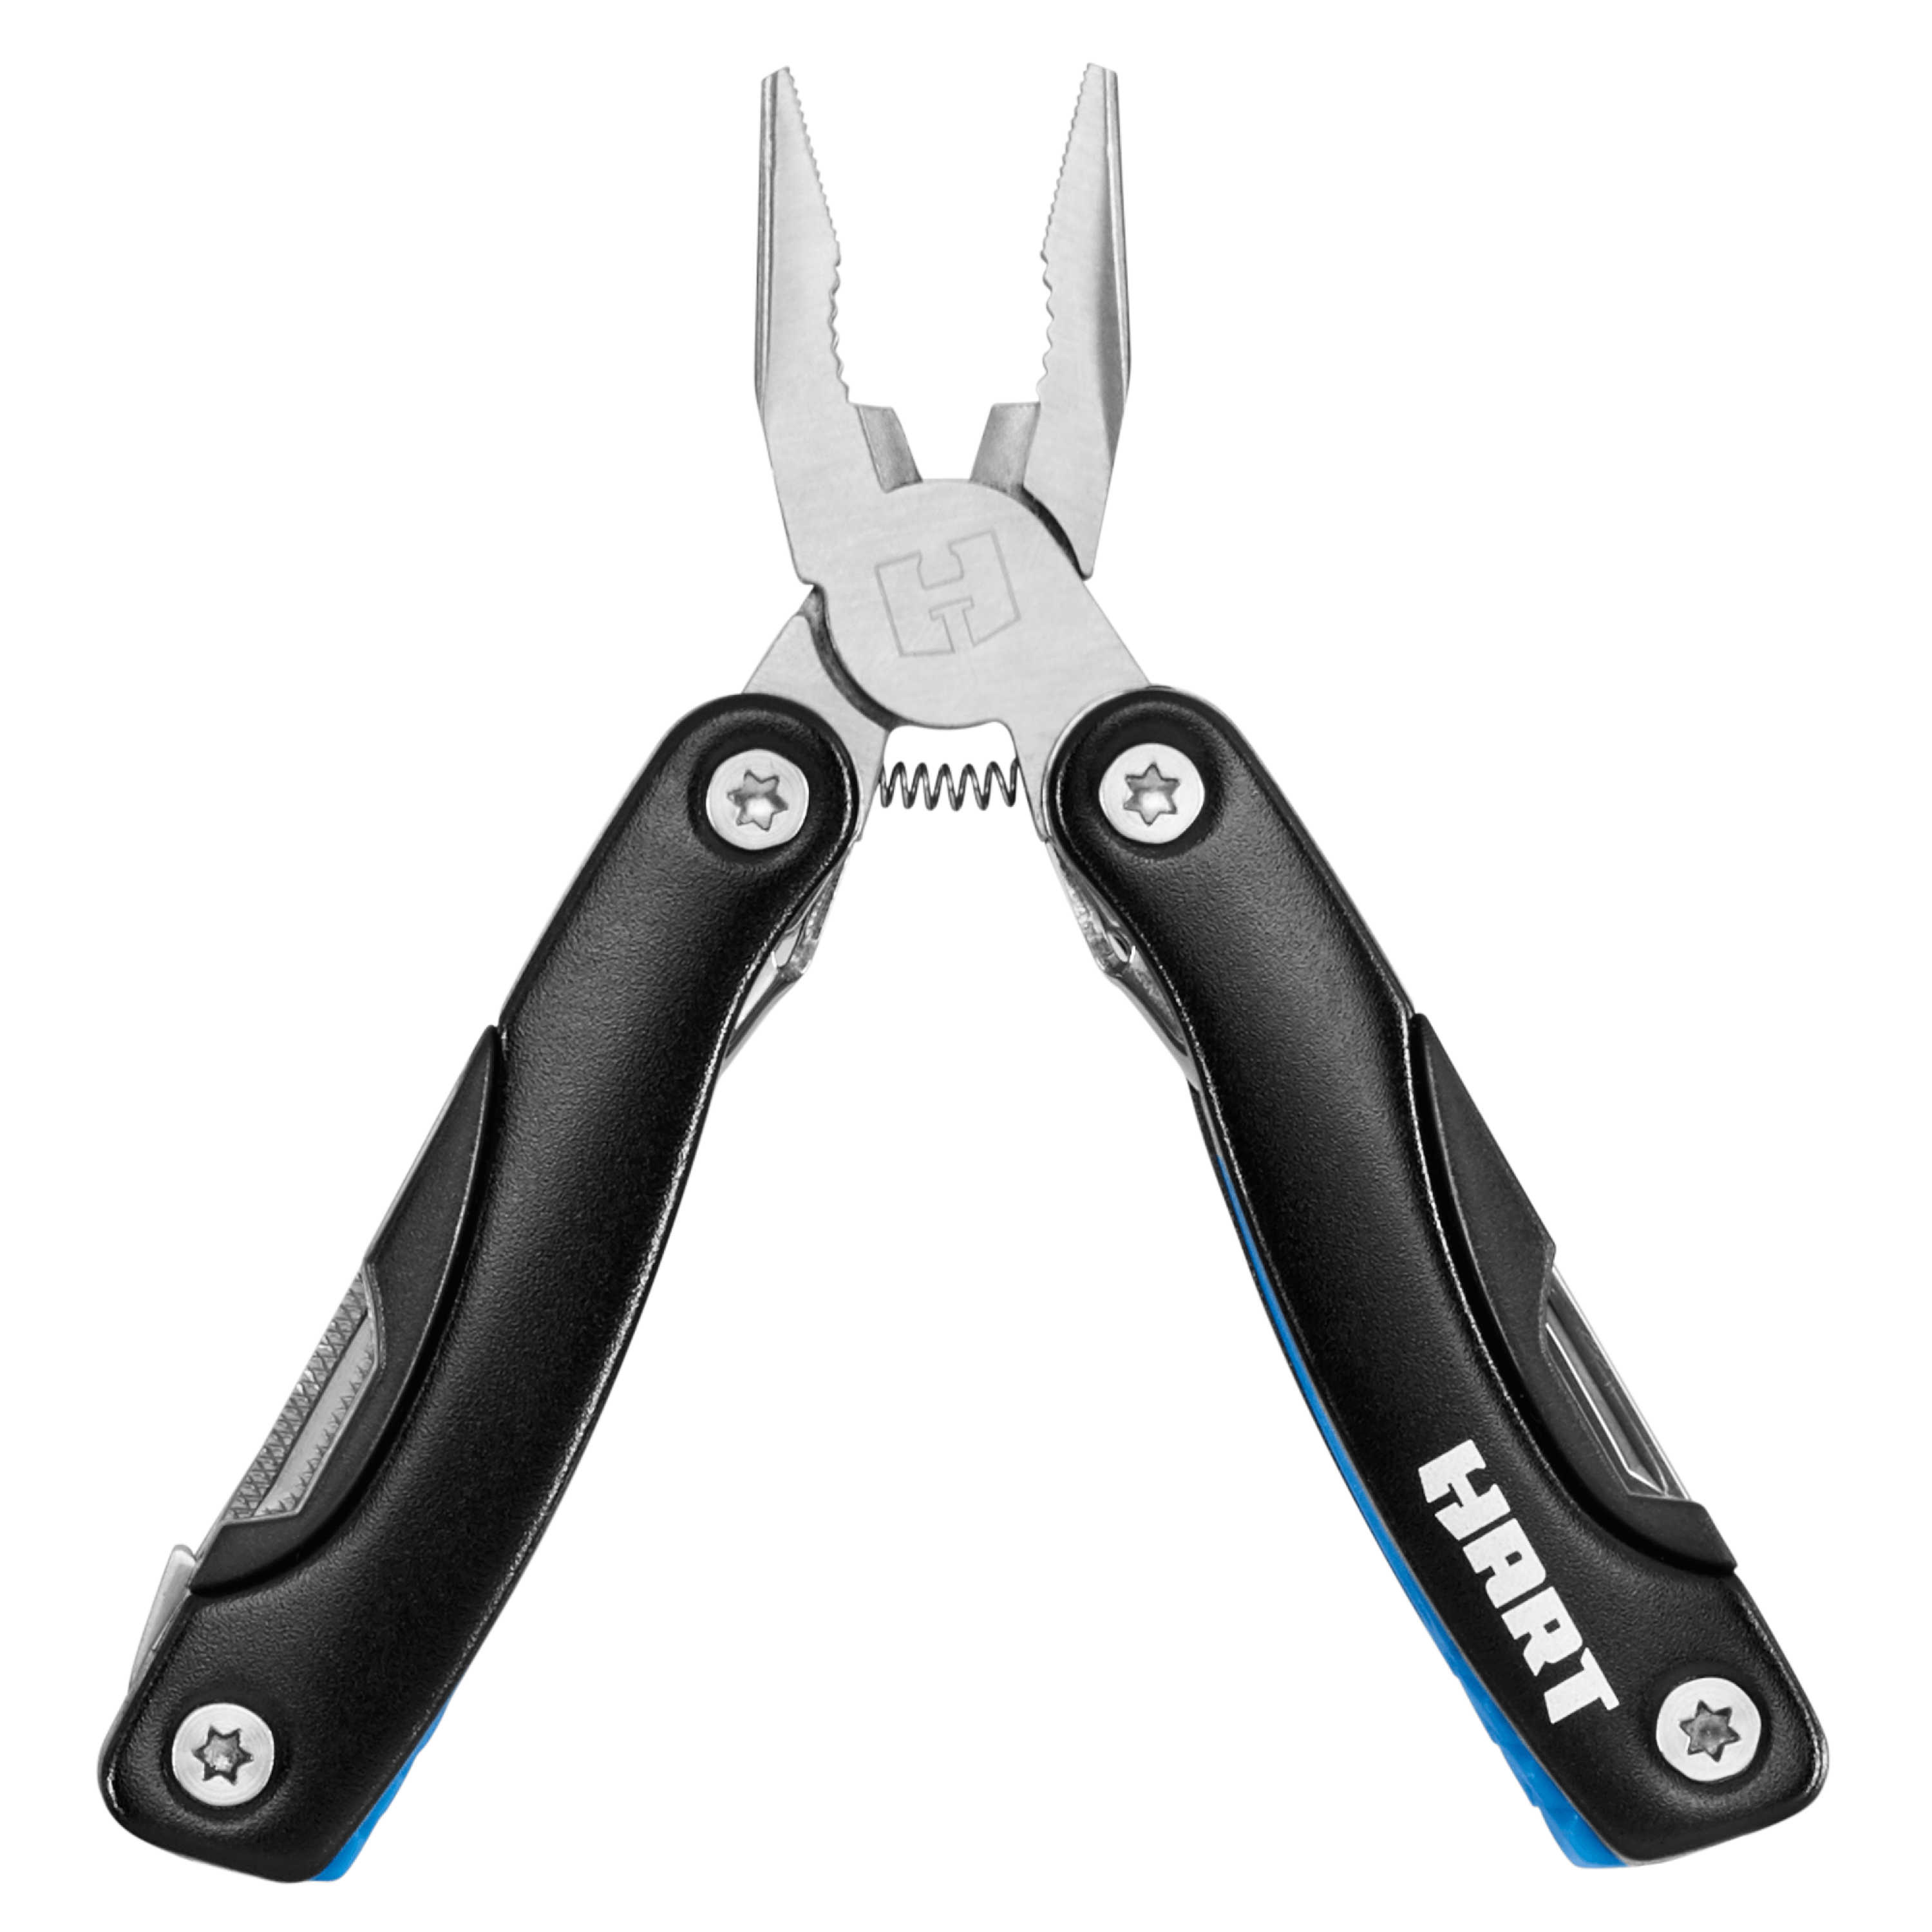 HART 14-in-1 Compact Multi-Tool with Storage Pouch - image 3 of 8